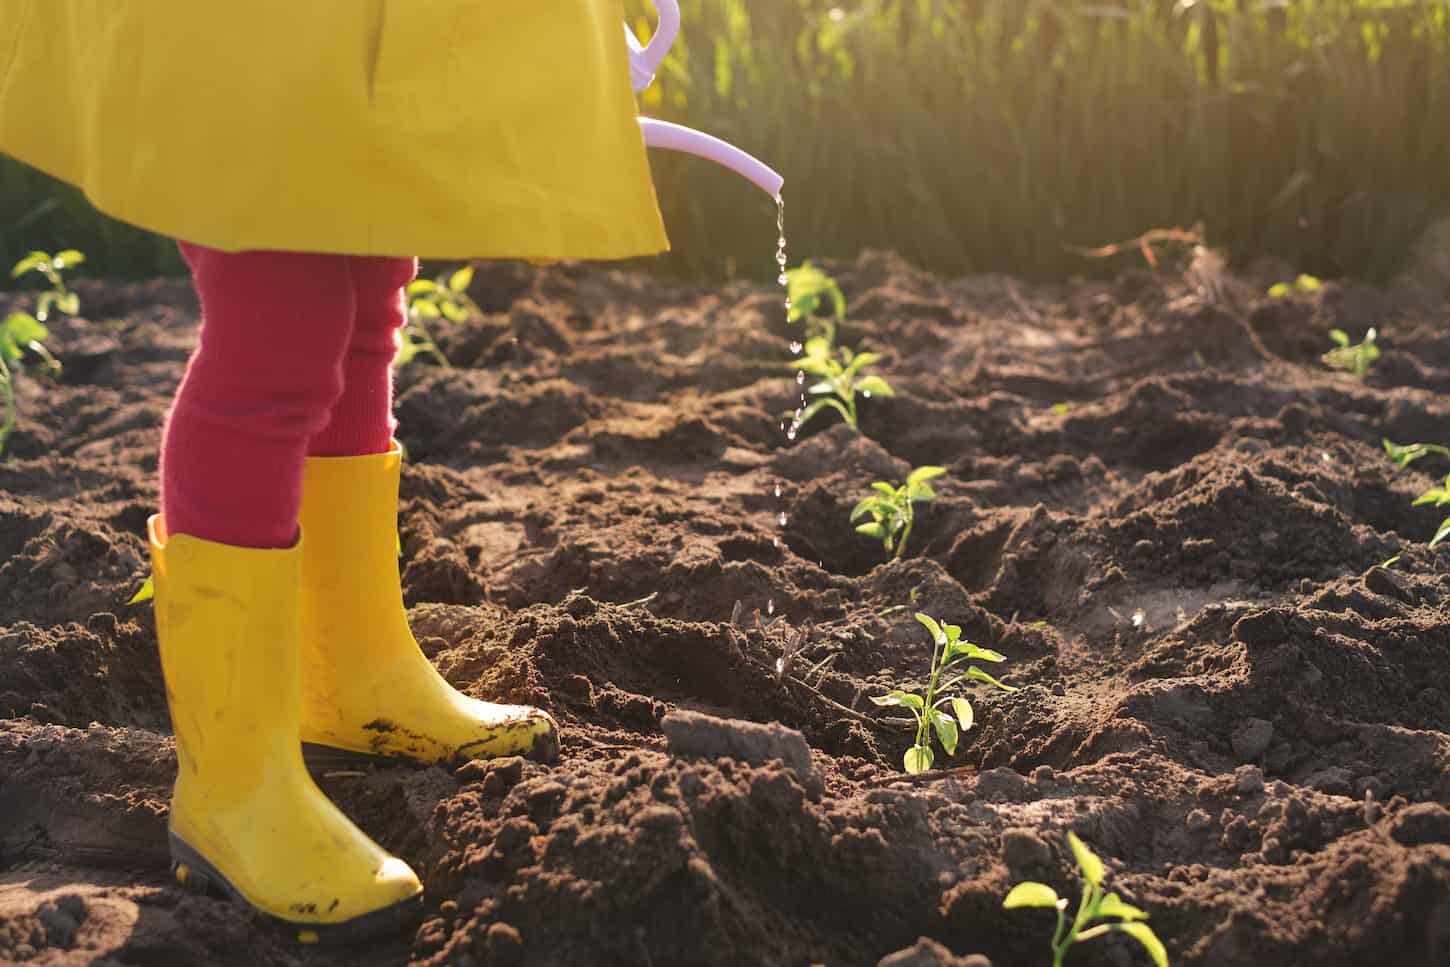 An image of a girl in rain boots pouring water from a watering can in a planted seedlings.